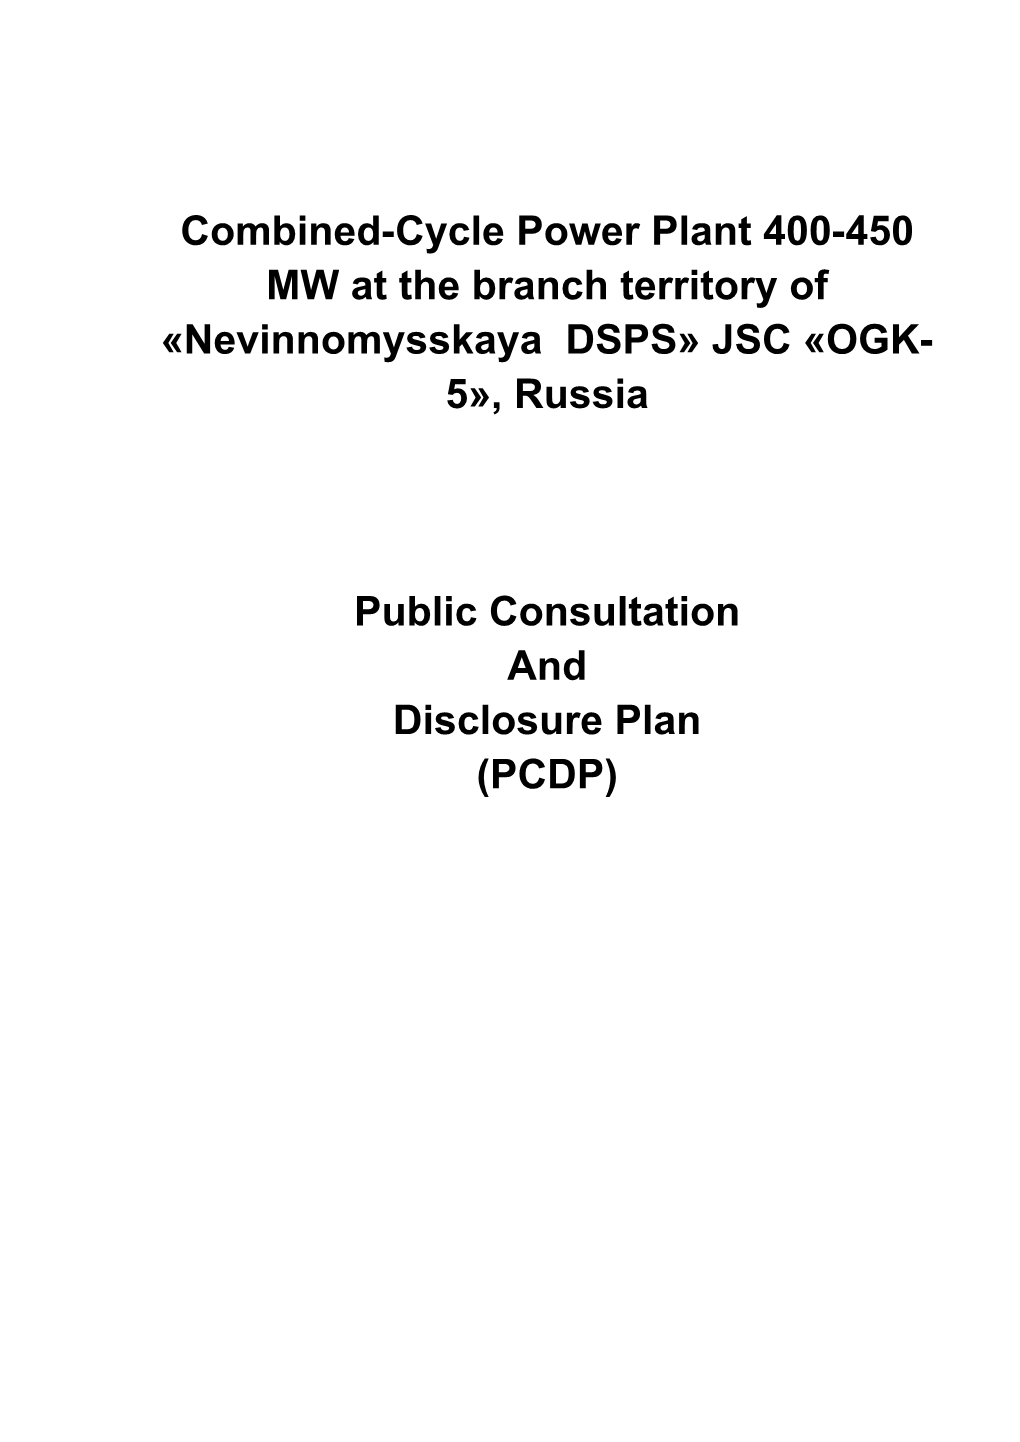 Combined-Cycle Power Plant 400-450 MW at the Branch Territory of «Nevinnomysskaya DSPS» JSC «OGK- 5», Russia